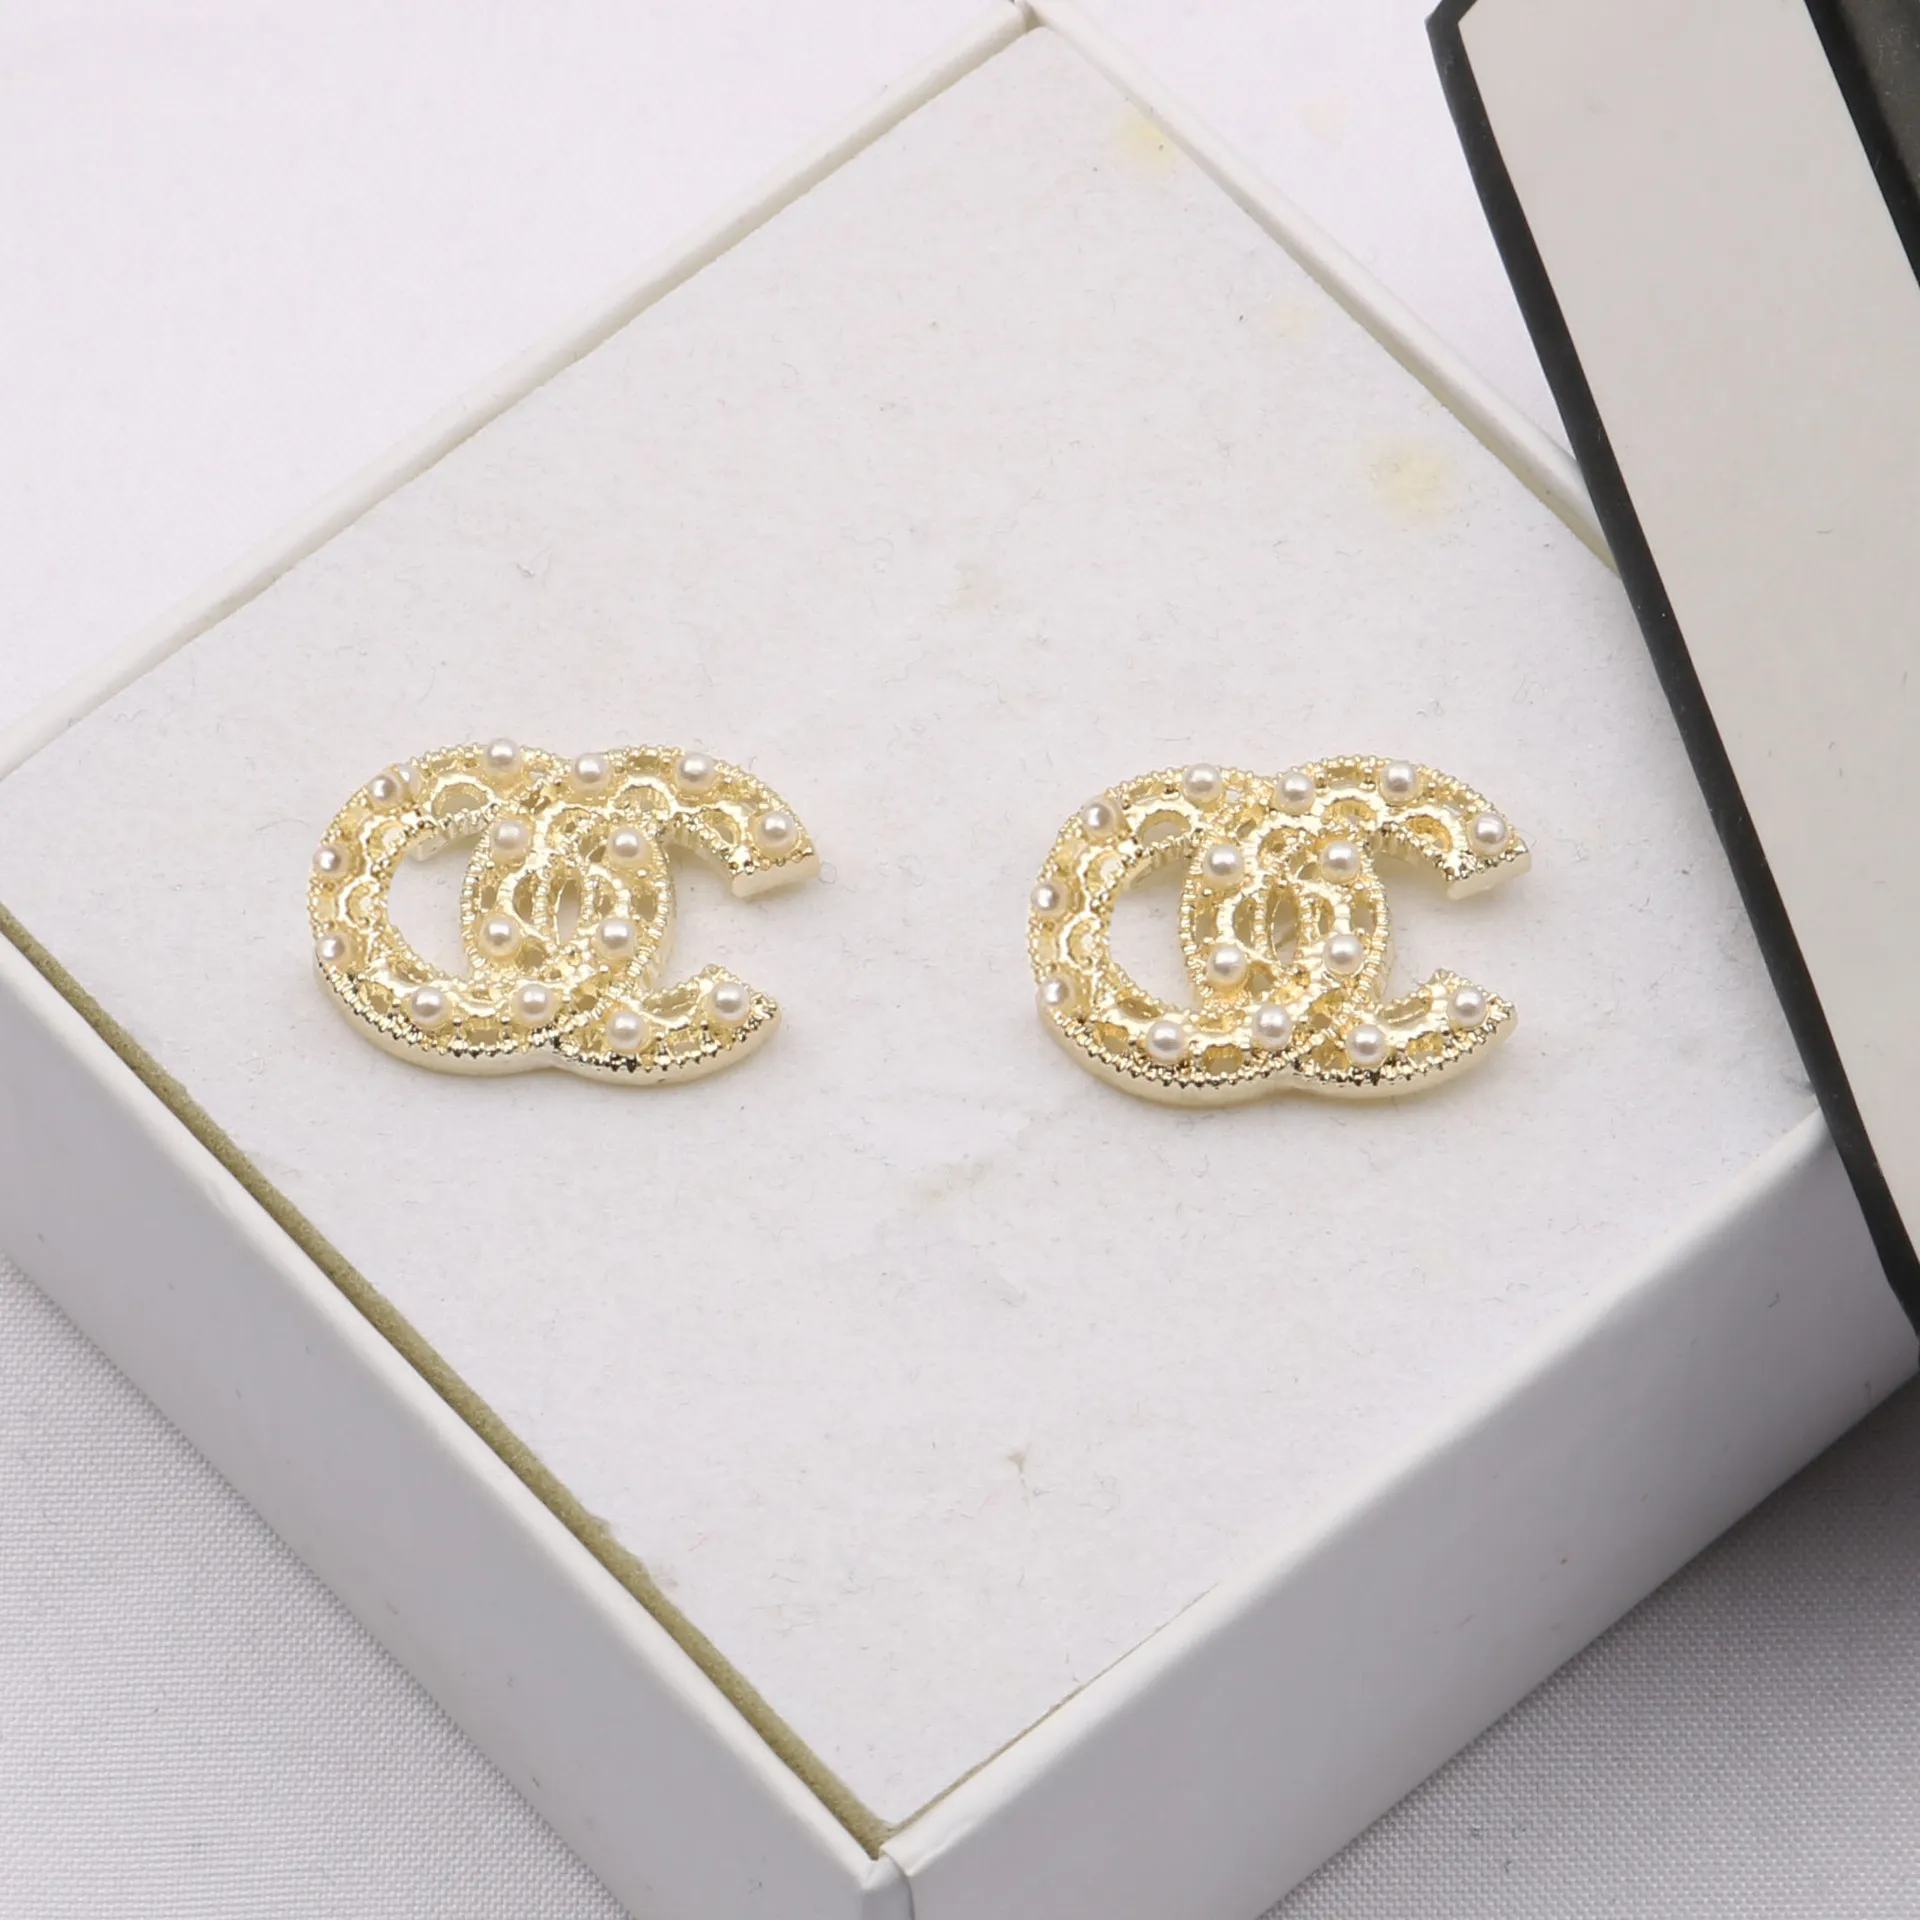 Canale Earring Gold Designer marchi placcati a doppia lettere Catena di clip Gioometriche Donne famose Sier Crystal Rhinestone Wedding Party Jewerlry 38 69